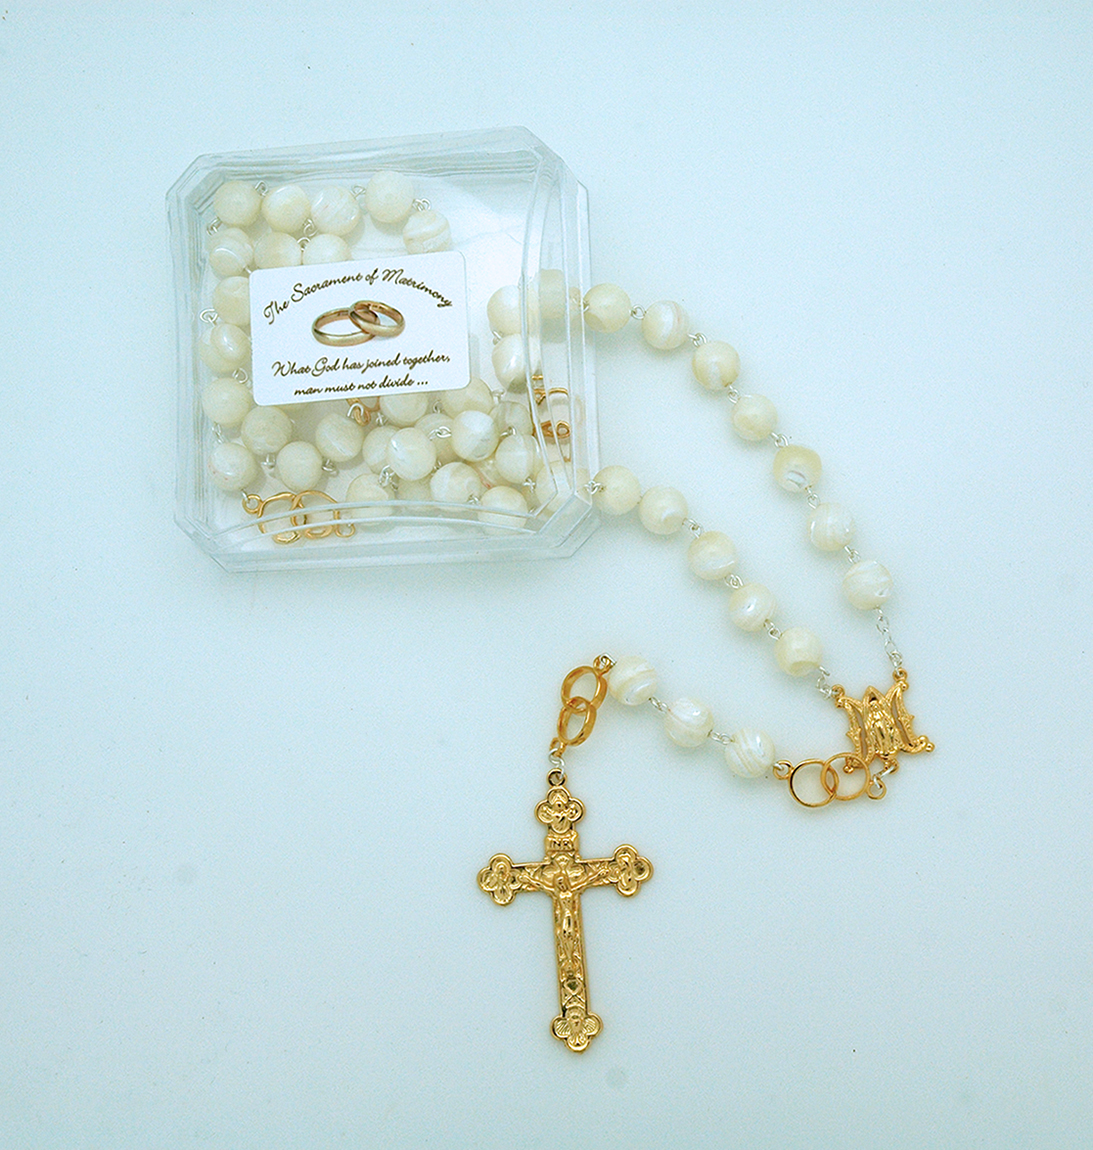 PMT505 - 10 mm. Mother of Pearl Bride's Rosary from Fatima